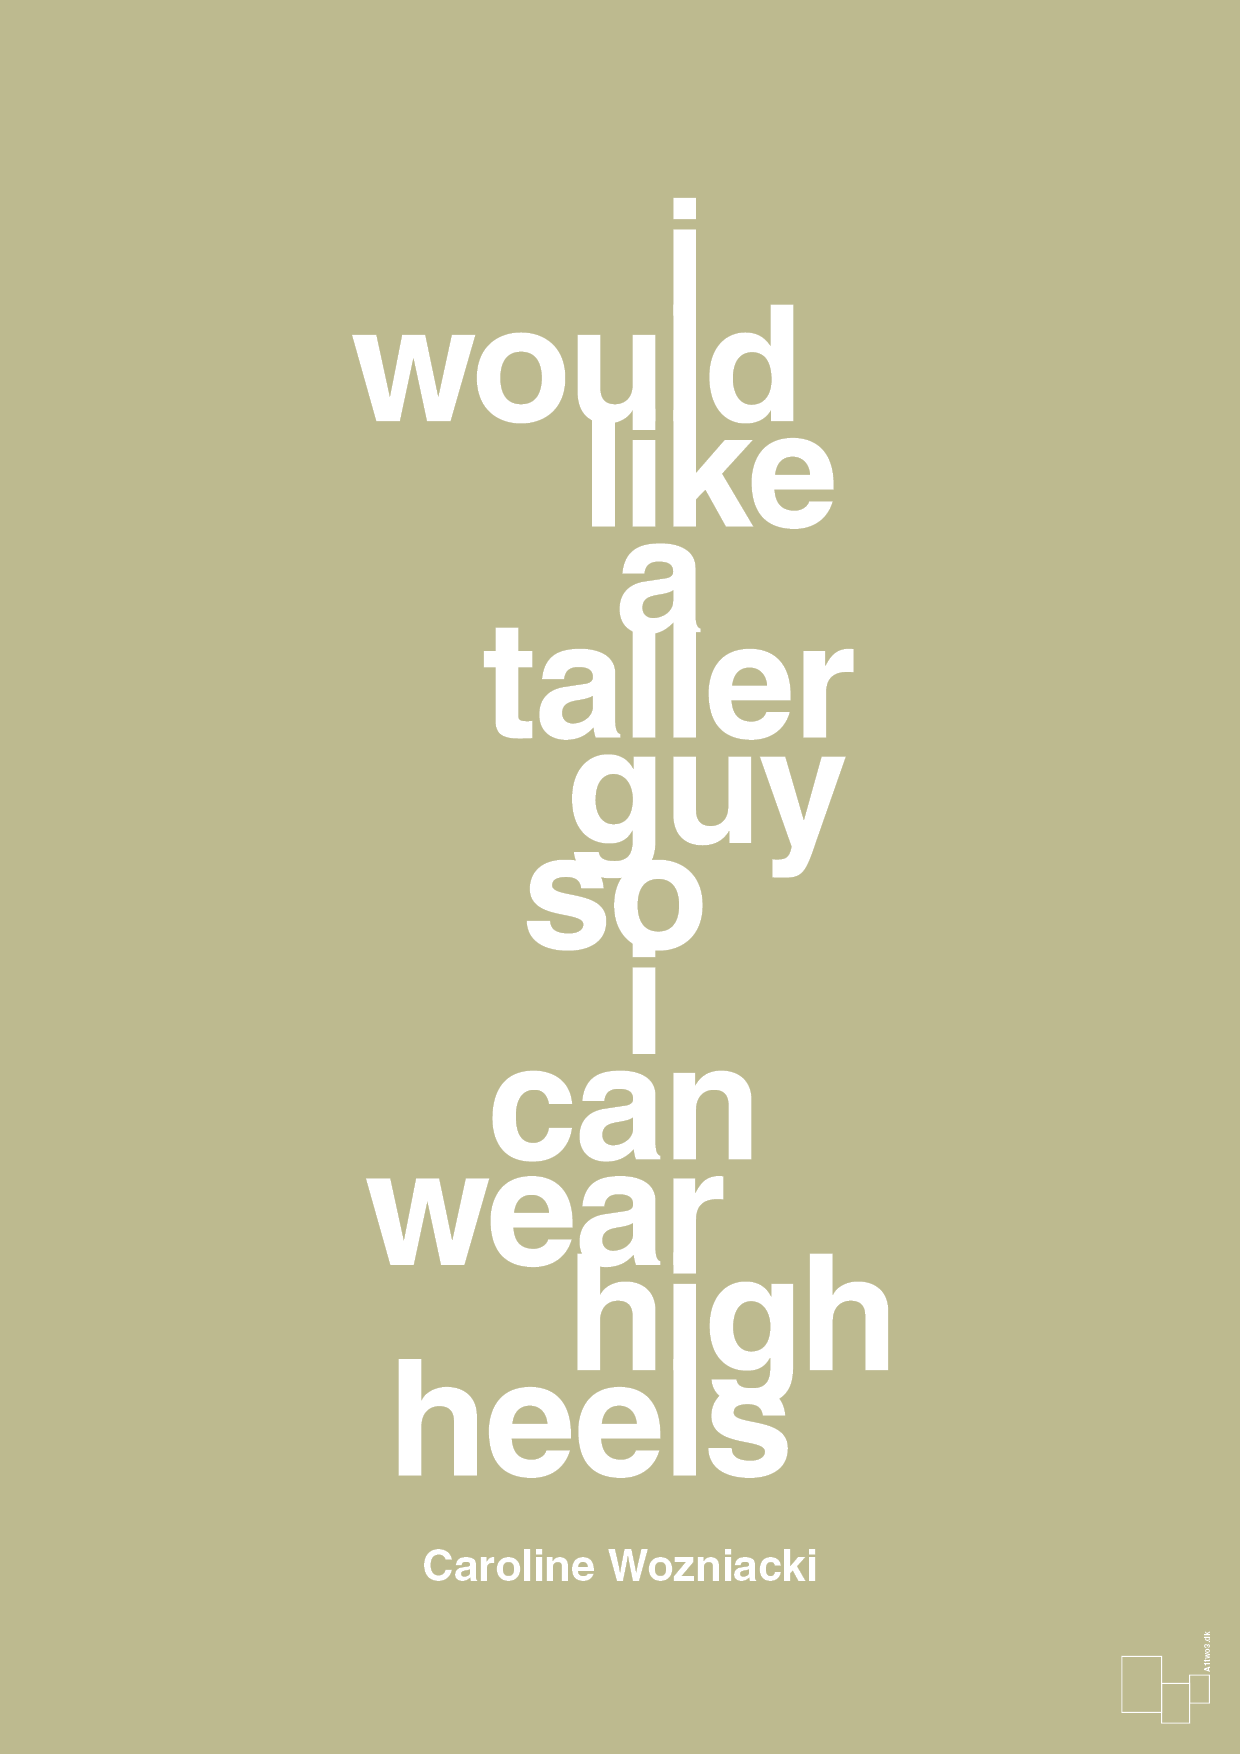 i would like a taller guy so i can wear high heels - Plakat med Citater i Back to Nature